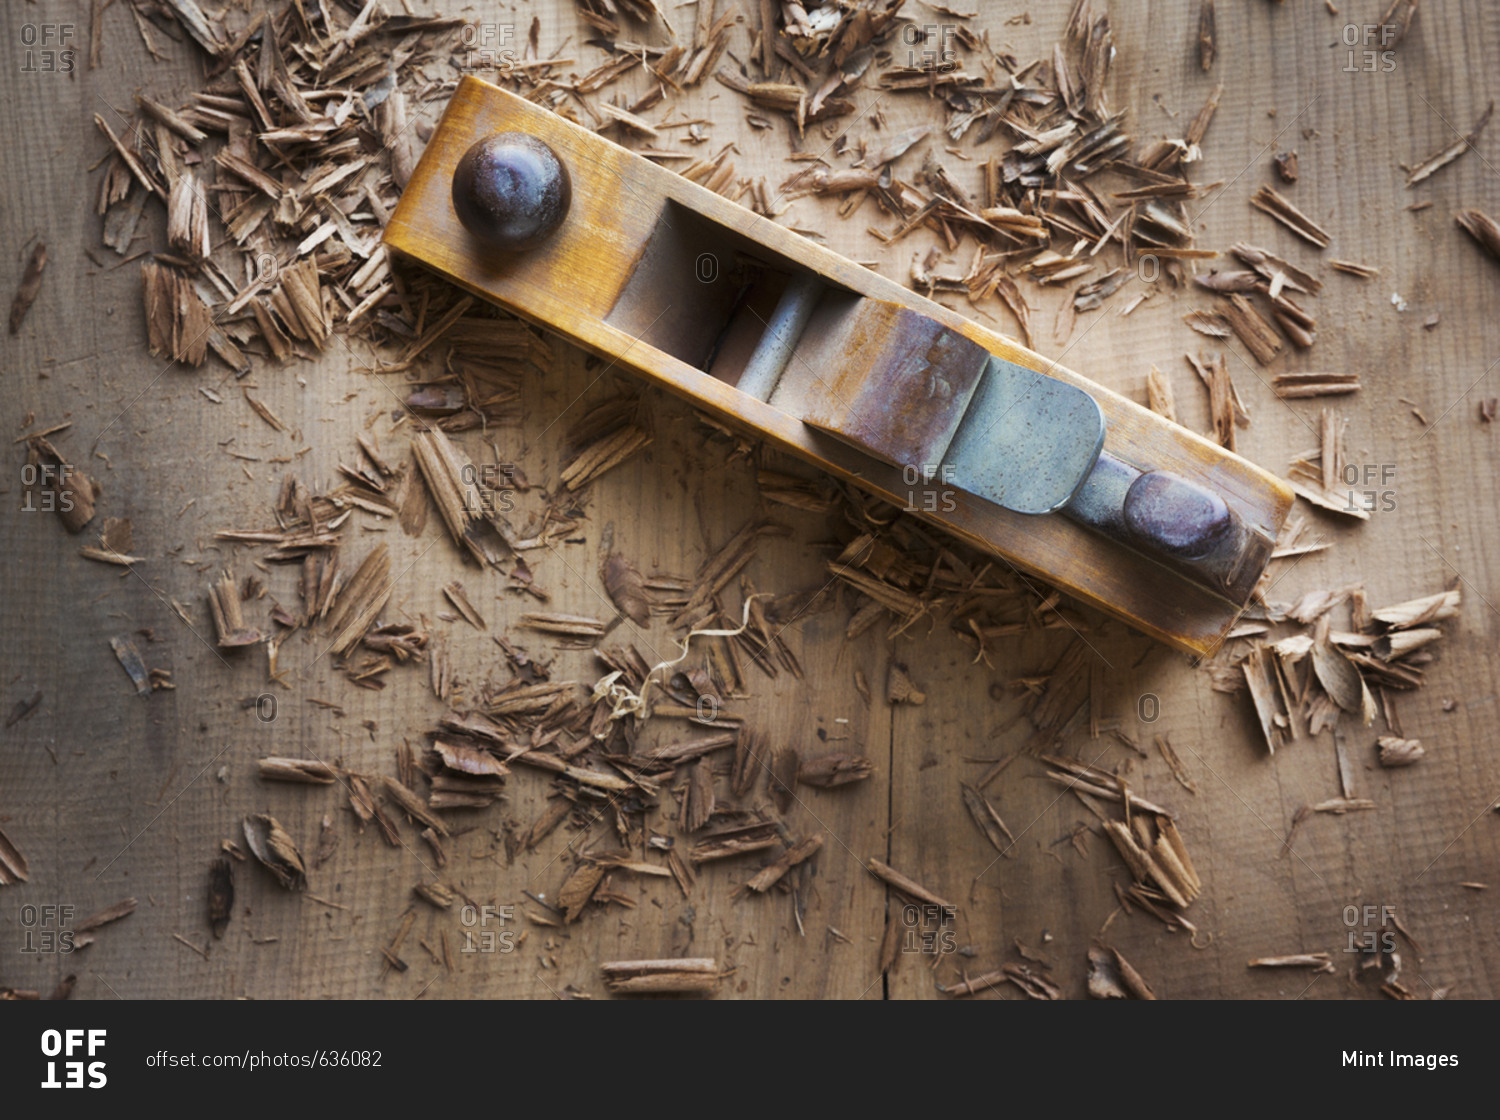 A wood plane on the surface of a piece of wood, shavings scattered about.